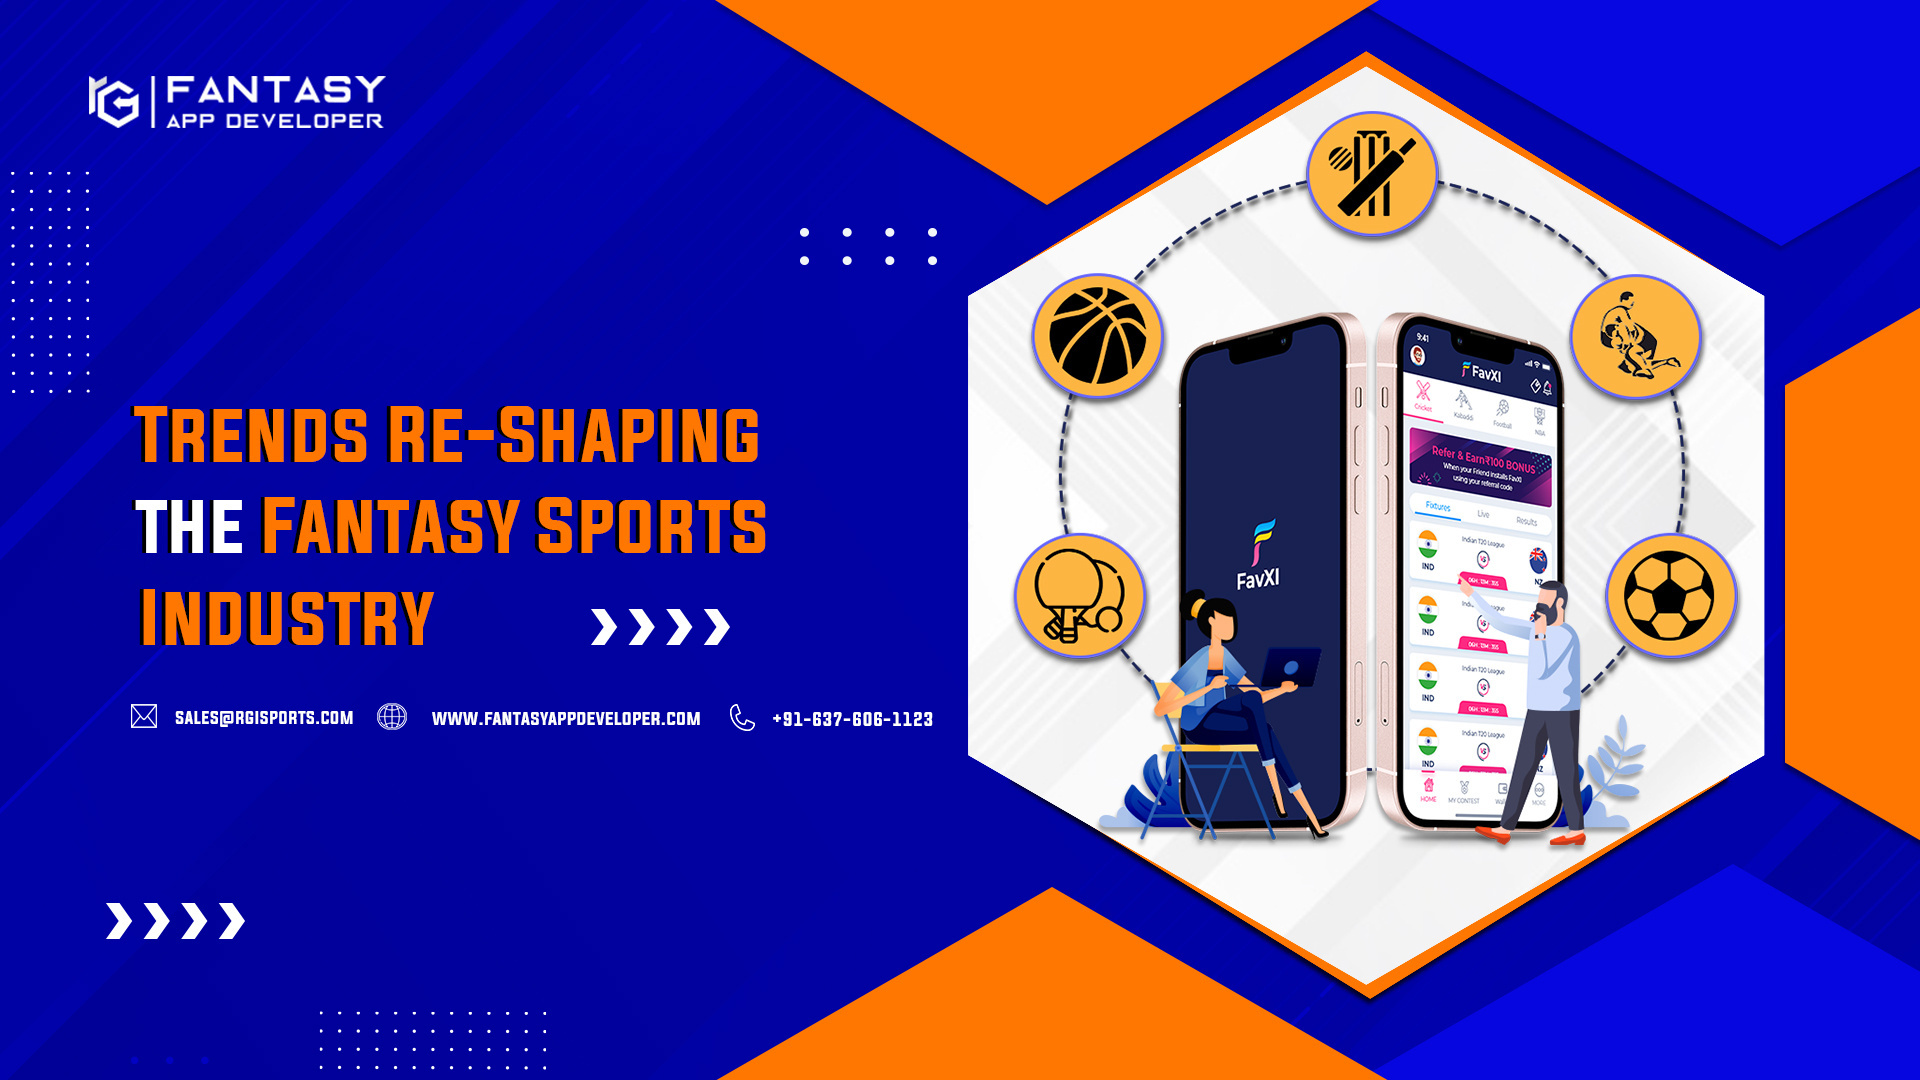 Trends Re-Shaping the Fantasy Sports Industry